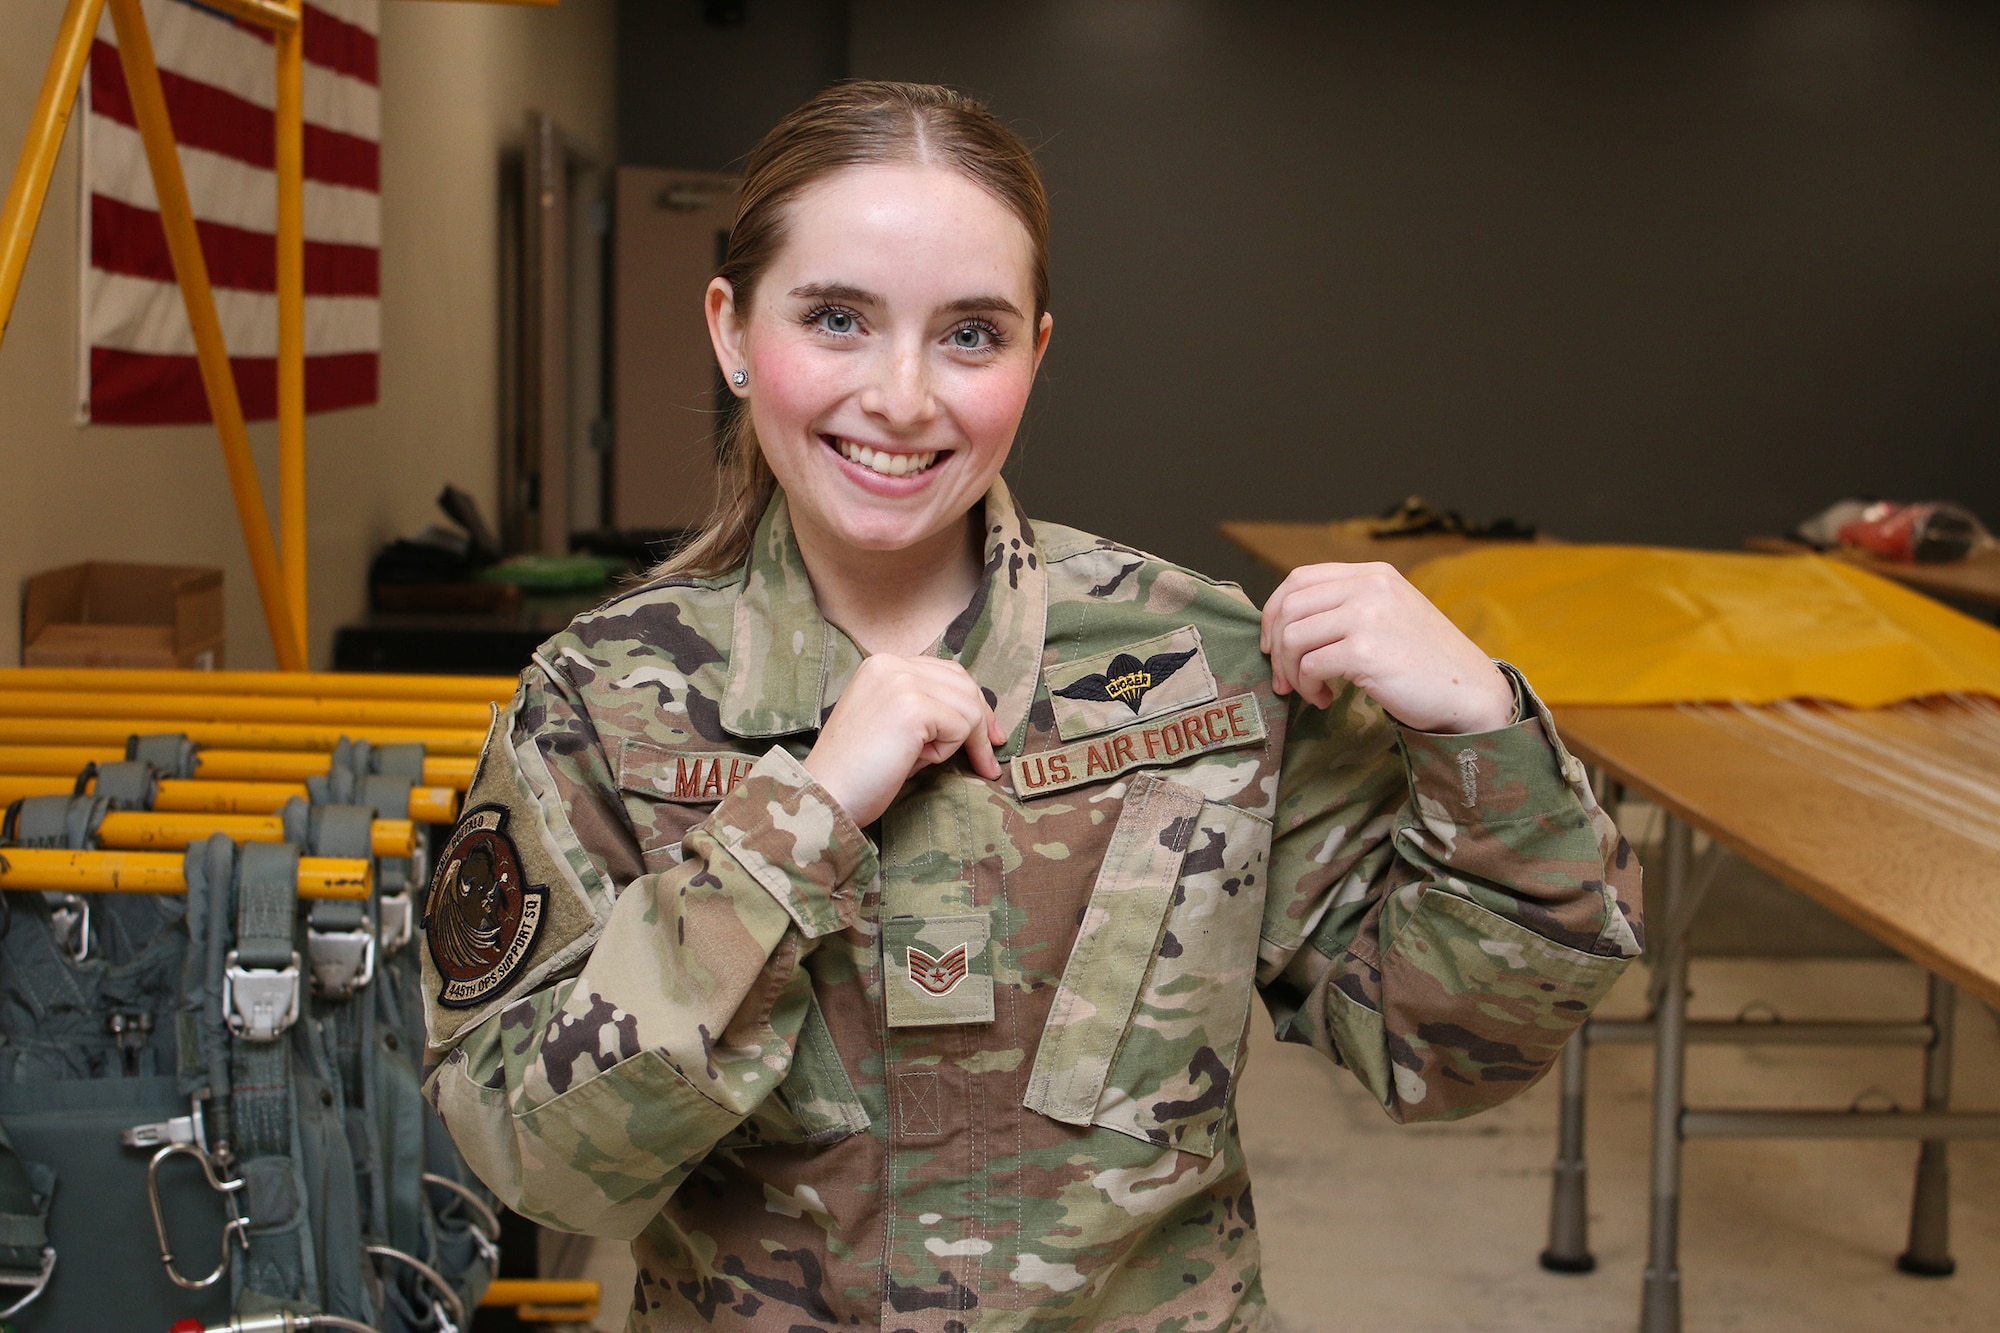 Staff Sgt. Sarah Maher, 445th Operations Support Squadron aircrew flight equipment technician shows off her Army parachute riggers patch. (U.S. Air Force photo/Tech. Sgt. Joel McCullough)